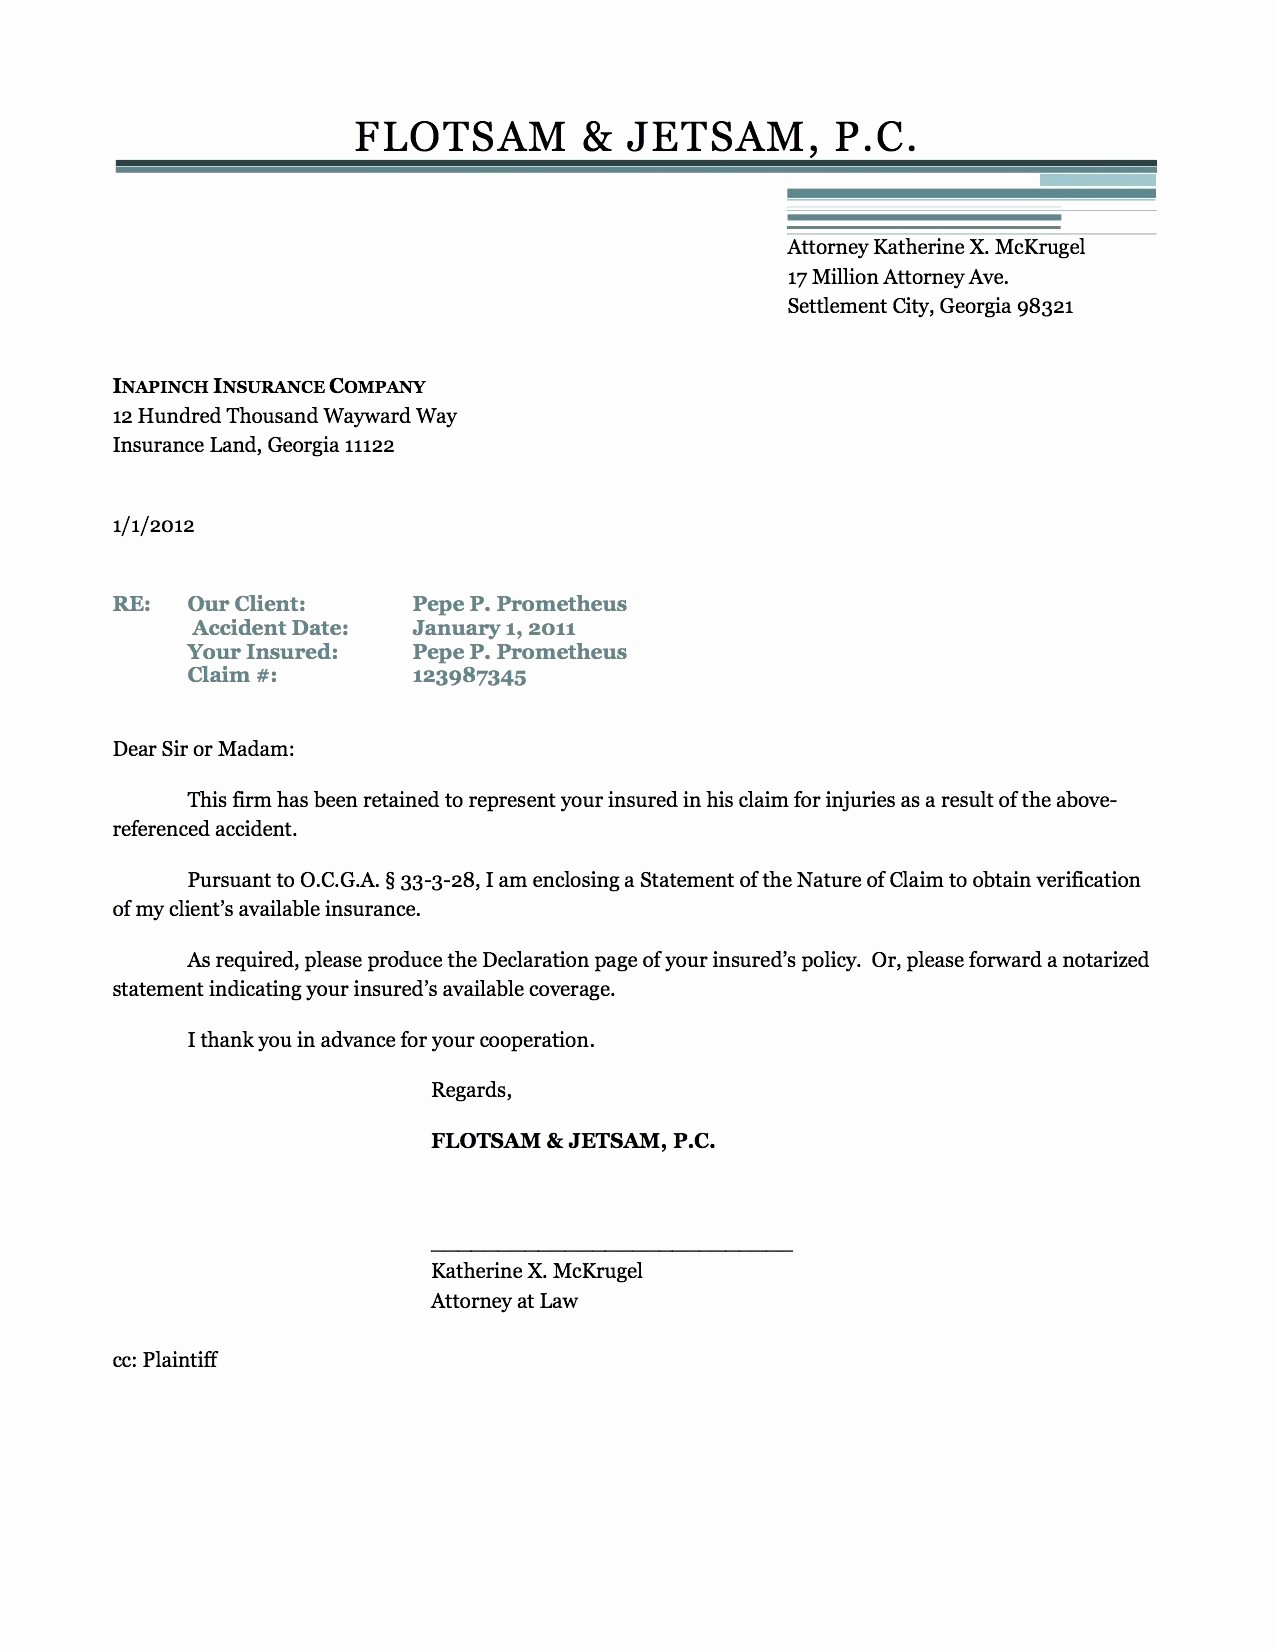 Certificate Of Insurance Request Letter Template Download Document Proof